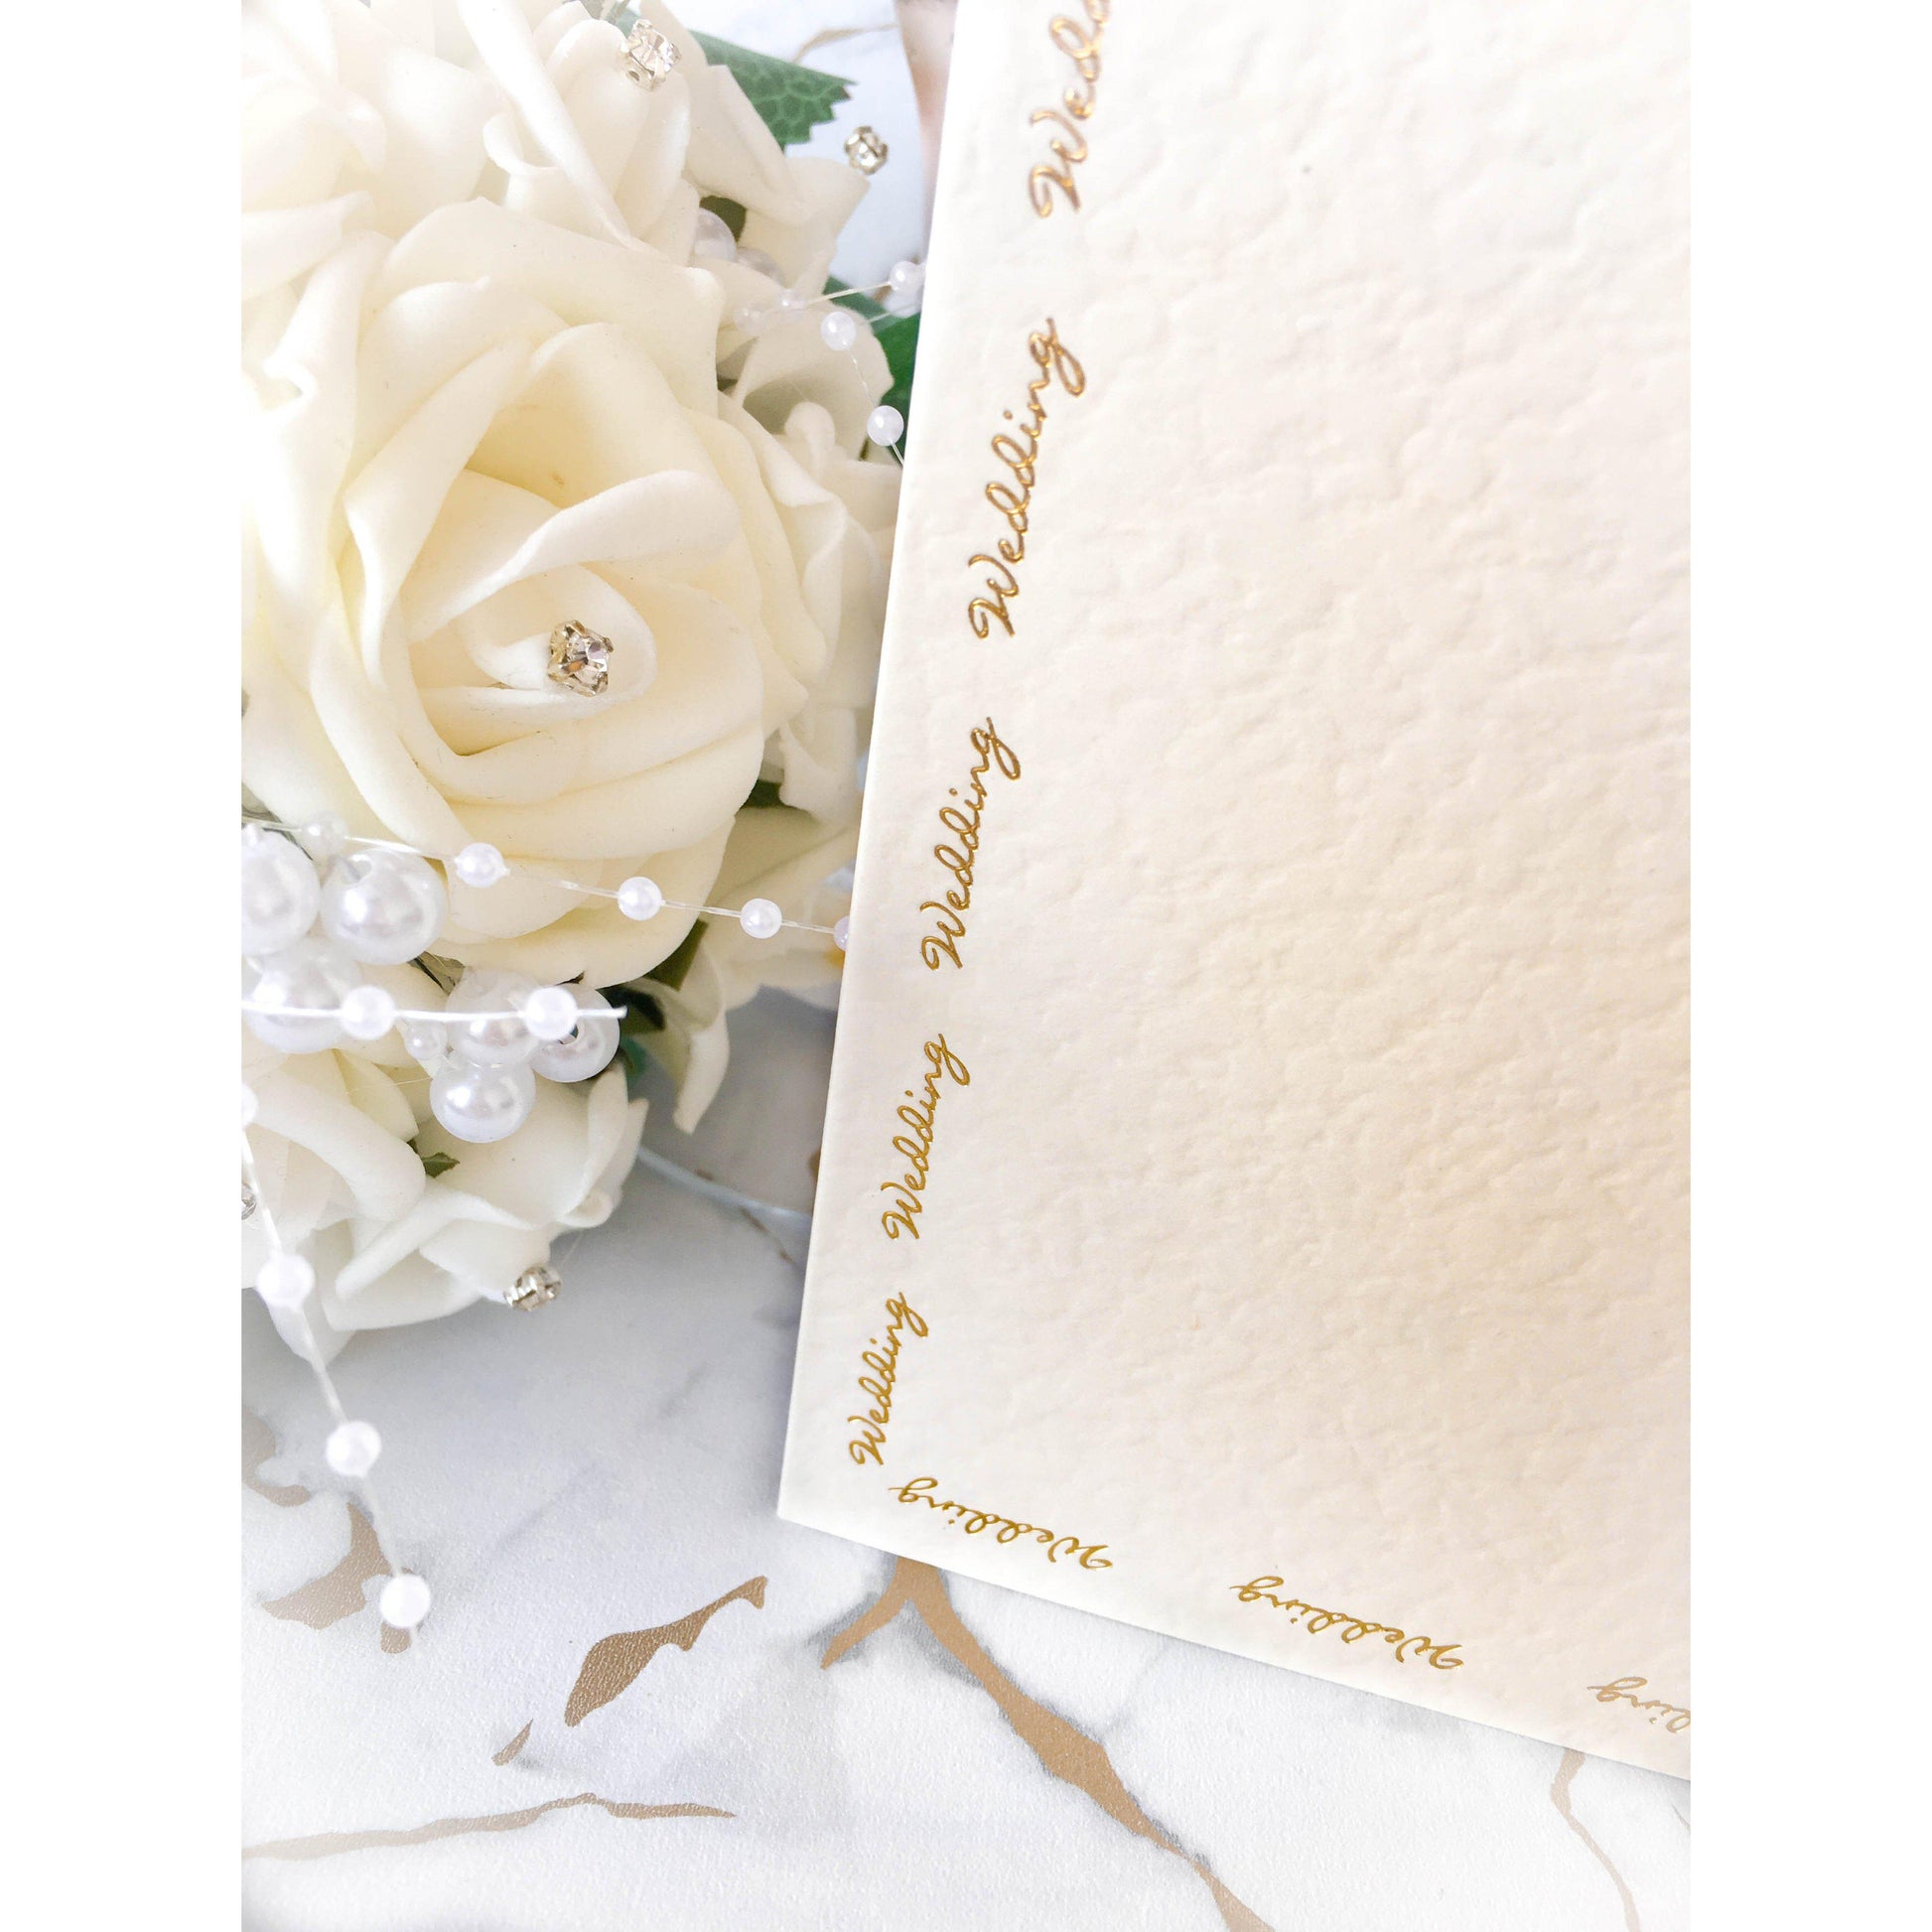 A5 Card Blanks Ivory Hammer Effect With Gold Foil Wedding Script 10pk - Clearance-The Creative Bride